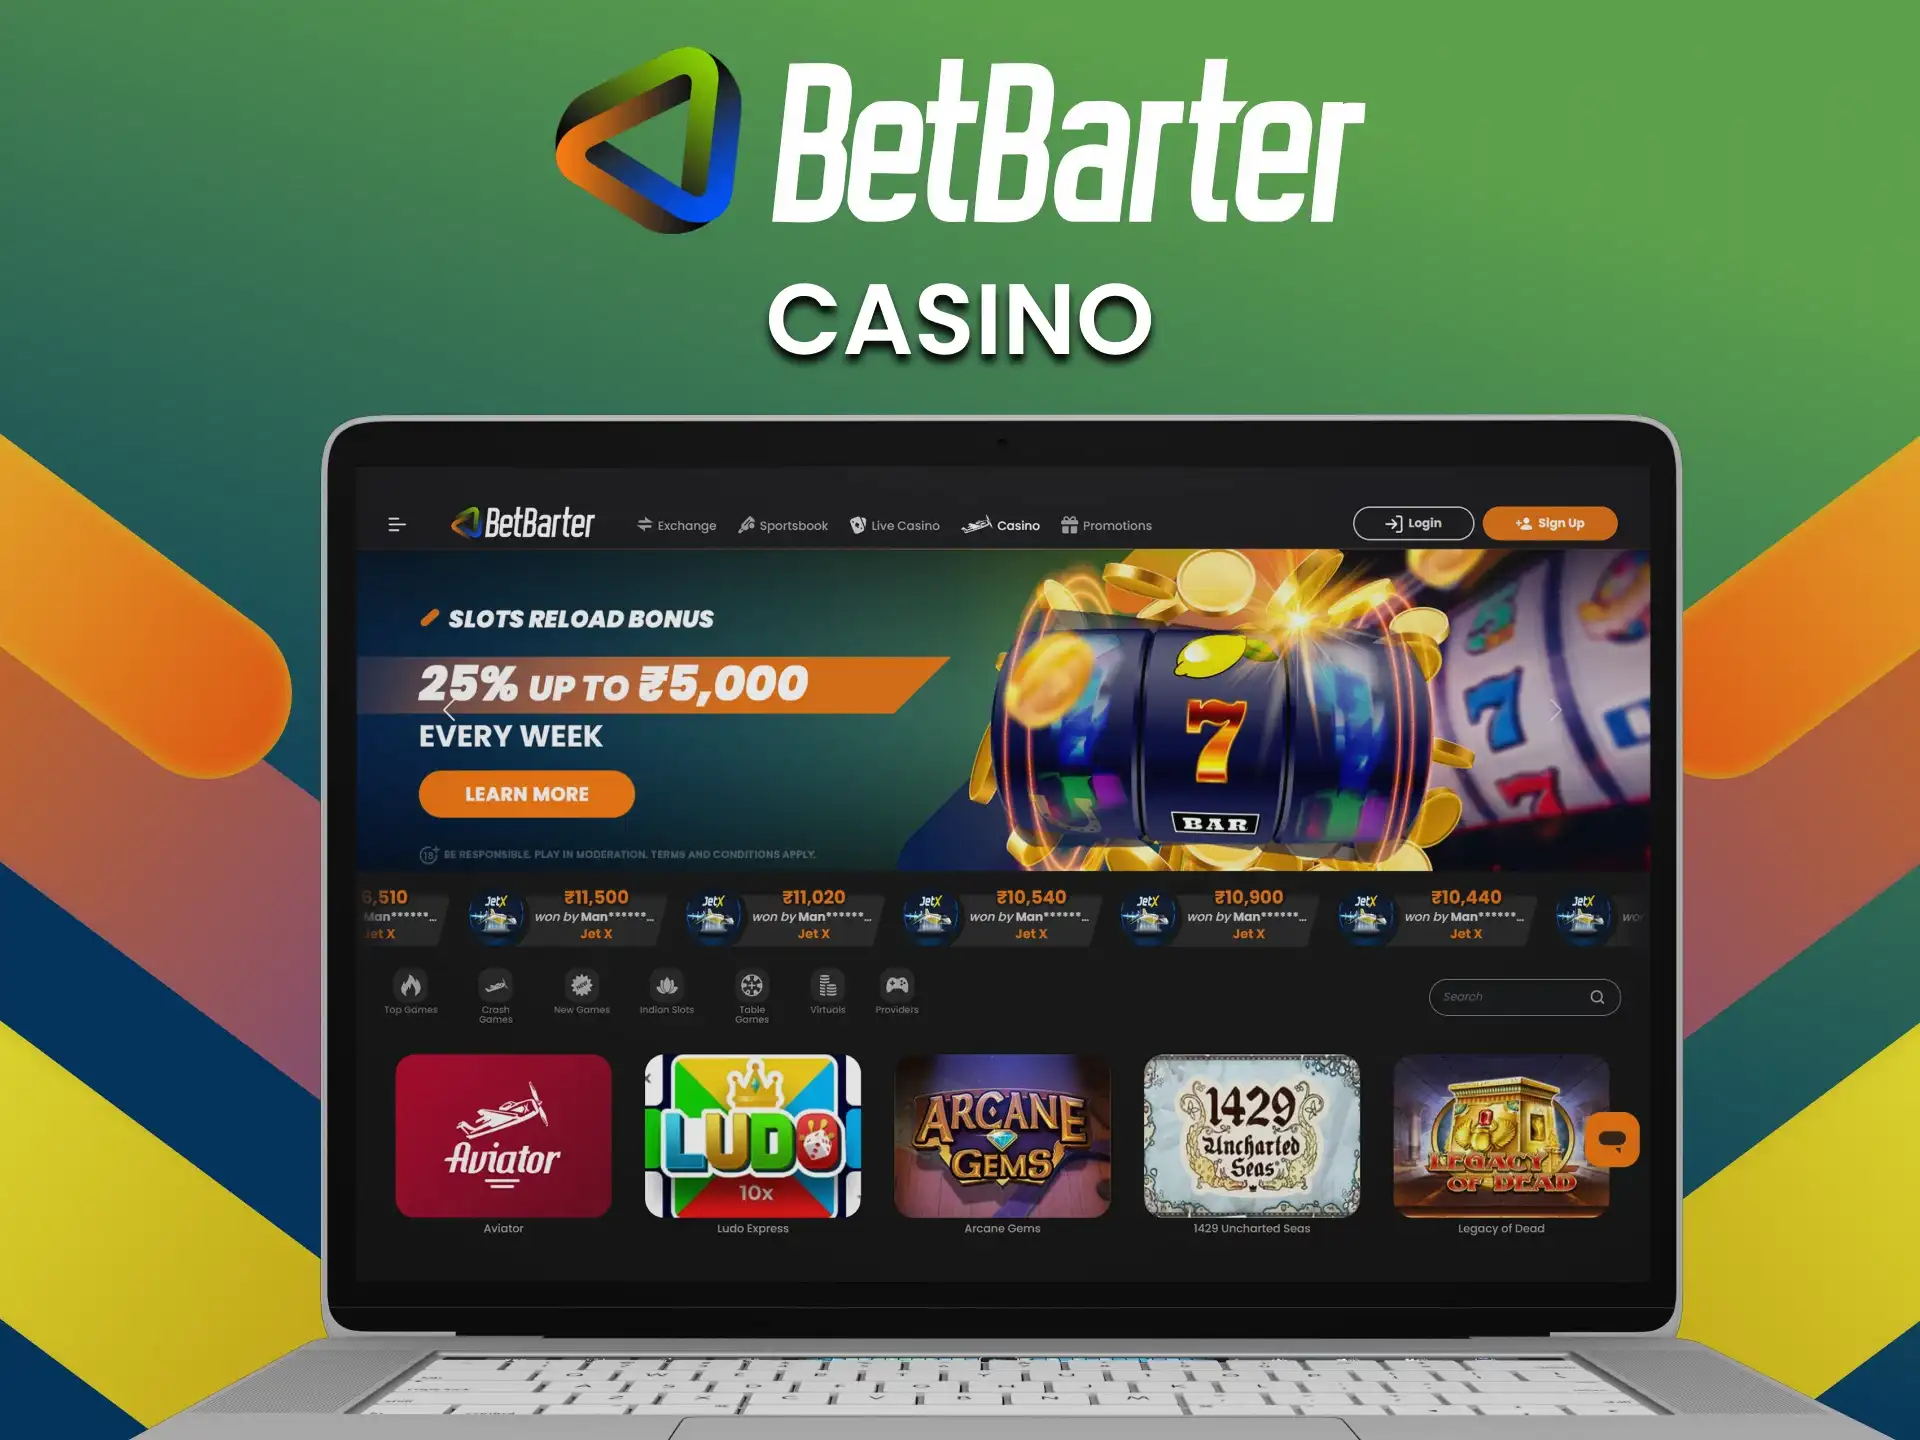 Fair odds are available, which increases the chances of success on the BetBarter game platform.